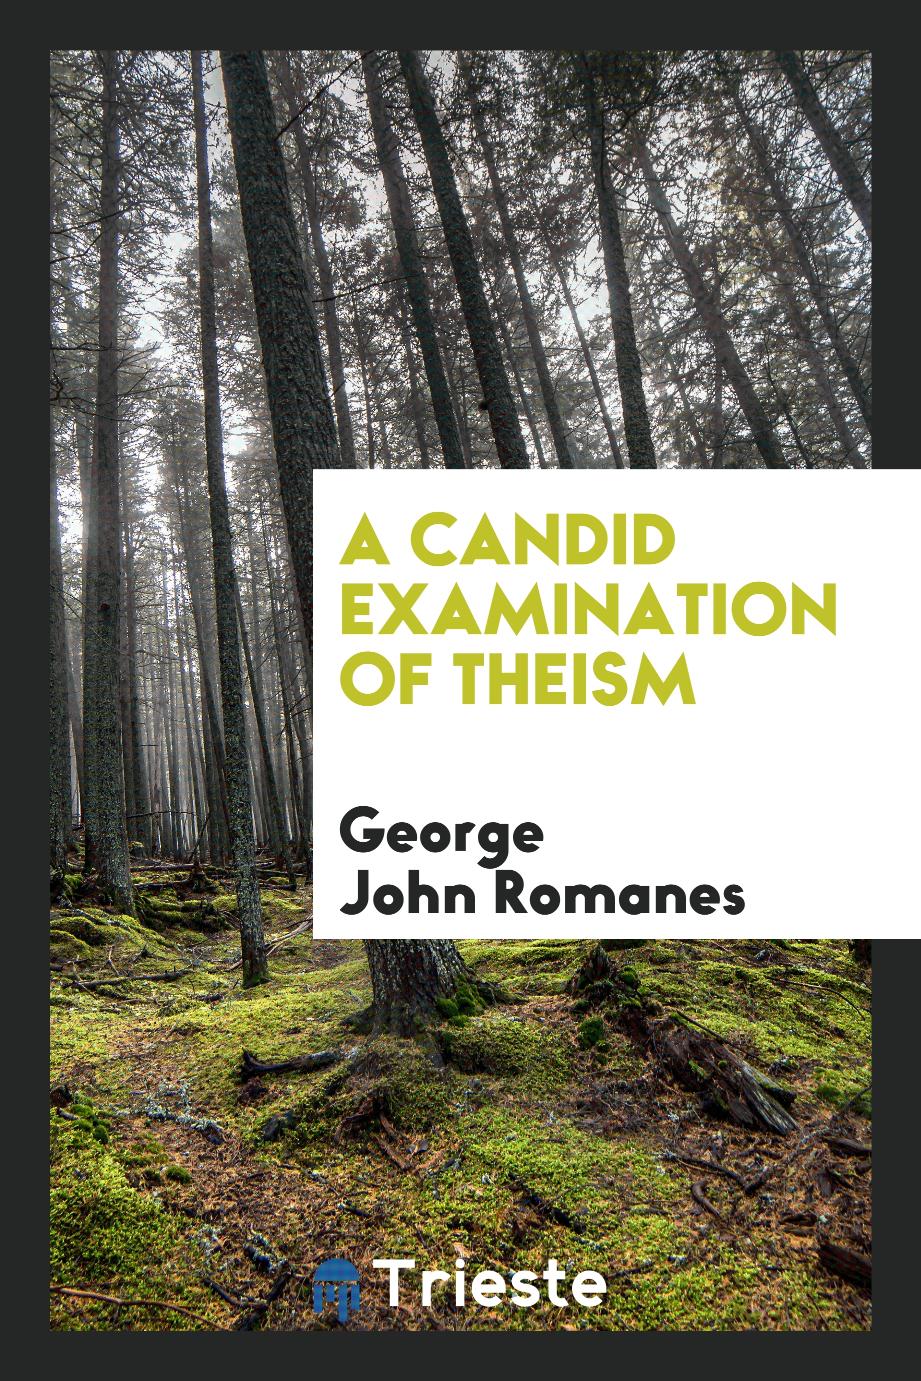 A candid examination of theism